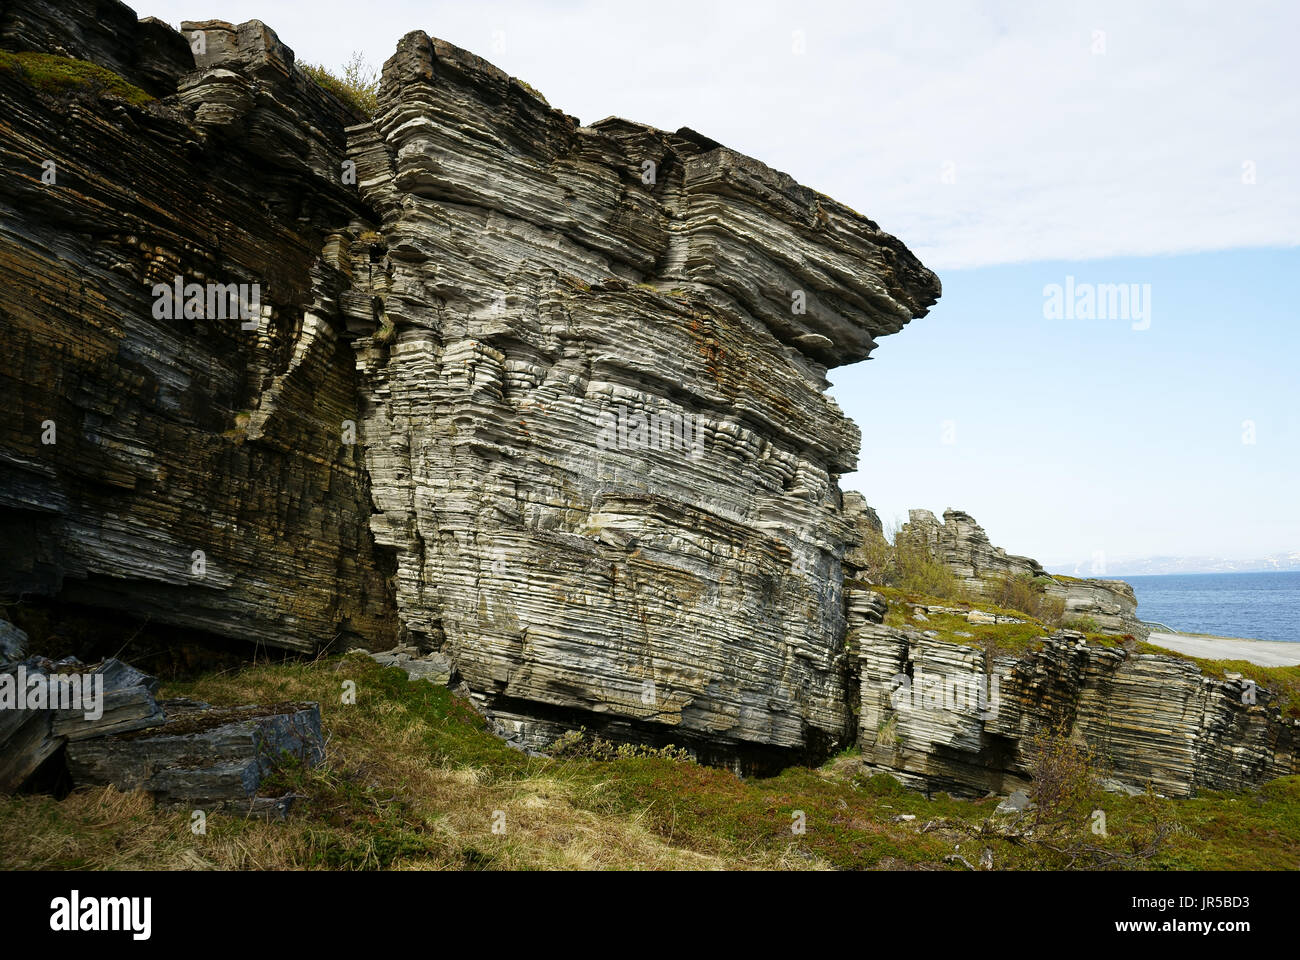 Rock layers on falt zone south of Honningsvag, North cape, Finnmark, Norway Stock Photo